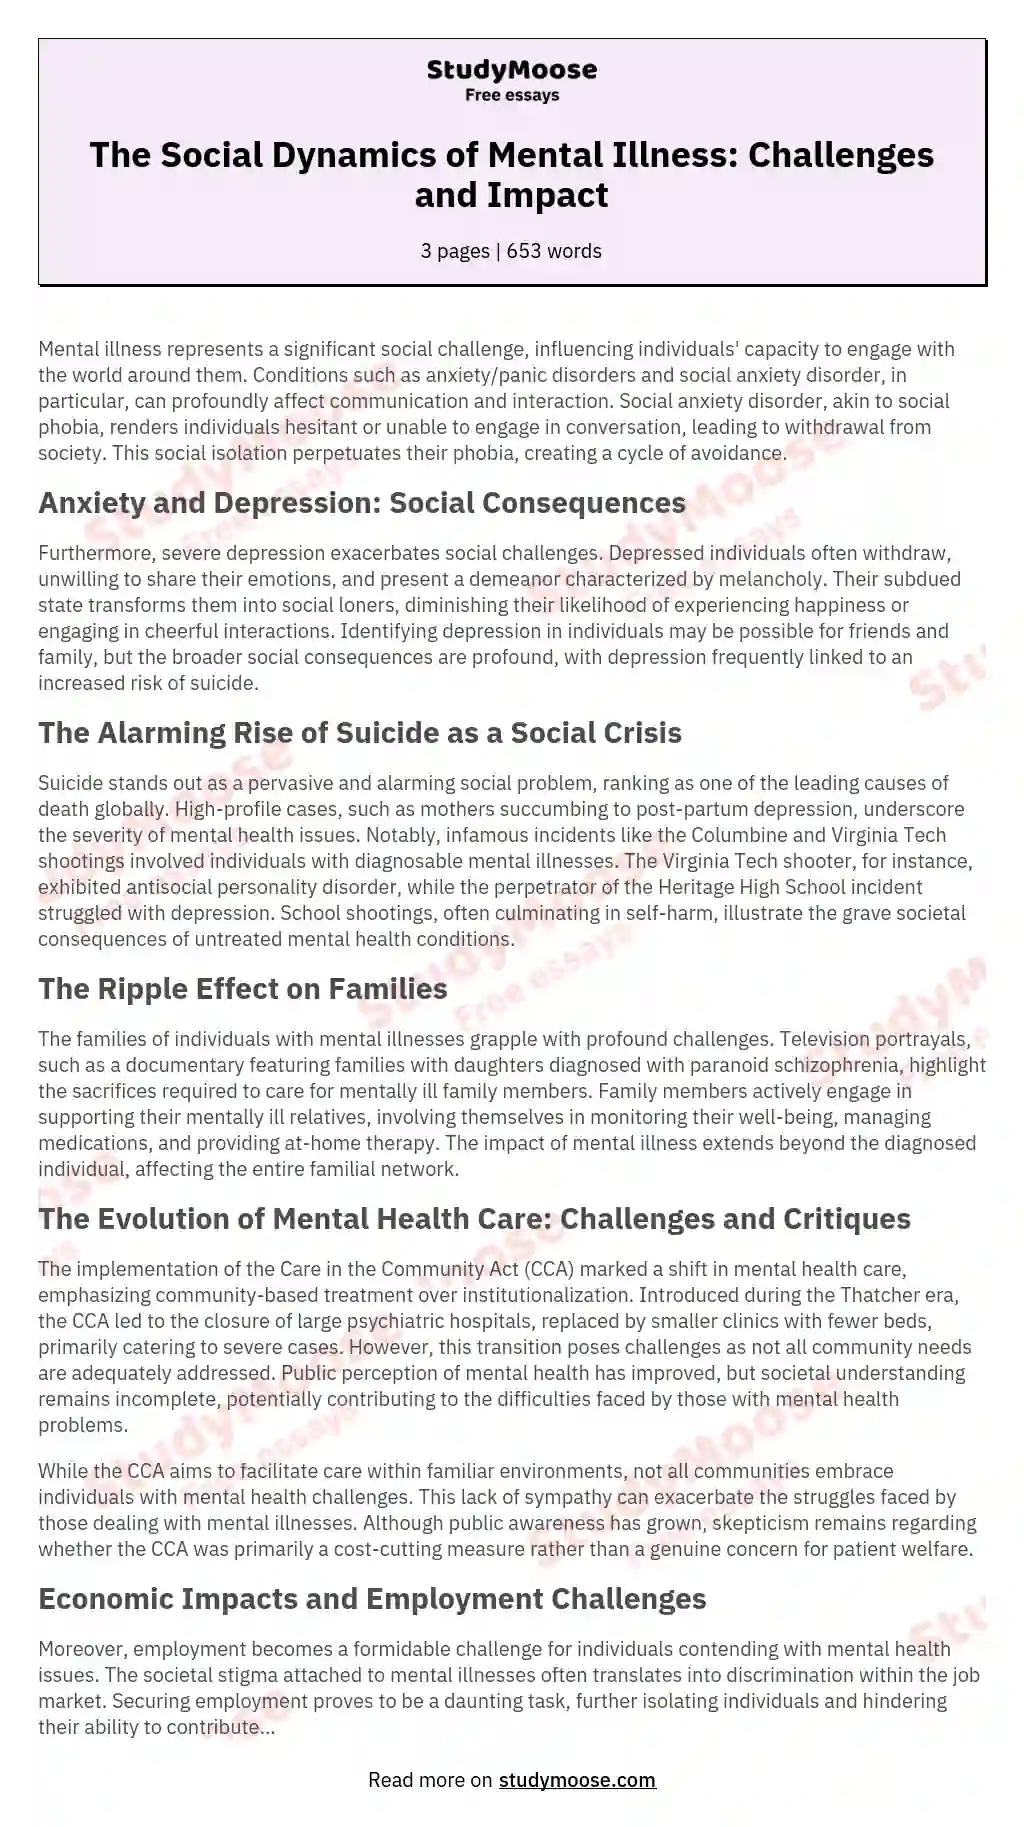 The Social Dynamics of Mental Illness: Challenges and Impact essay